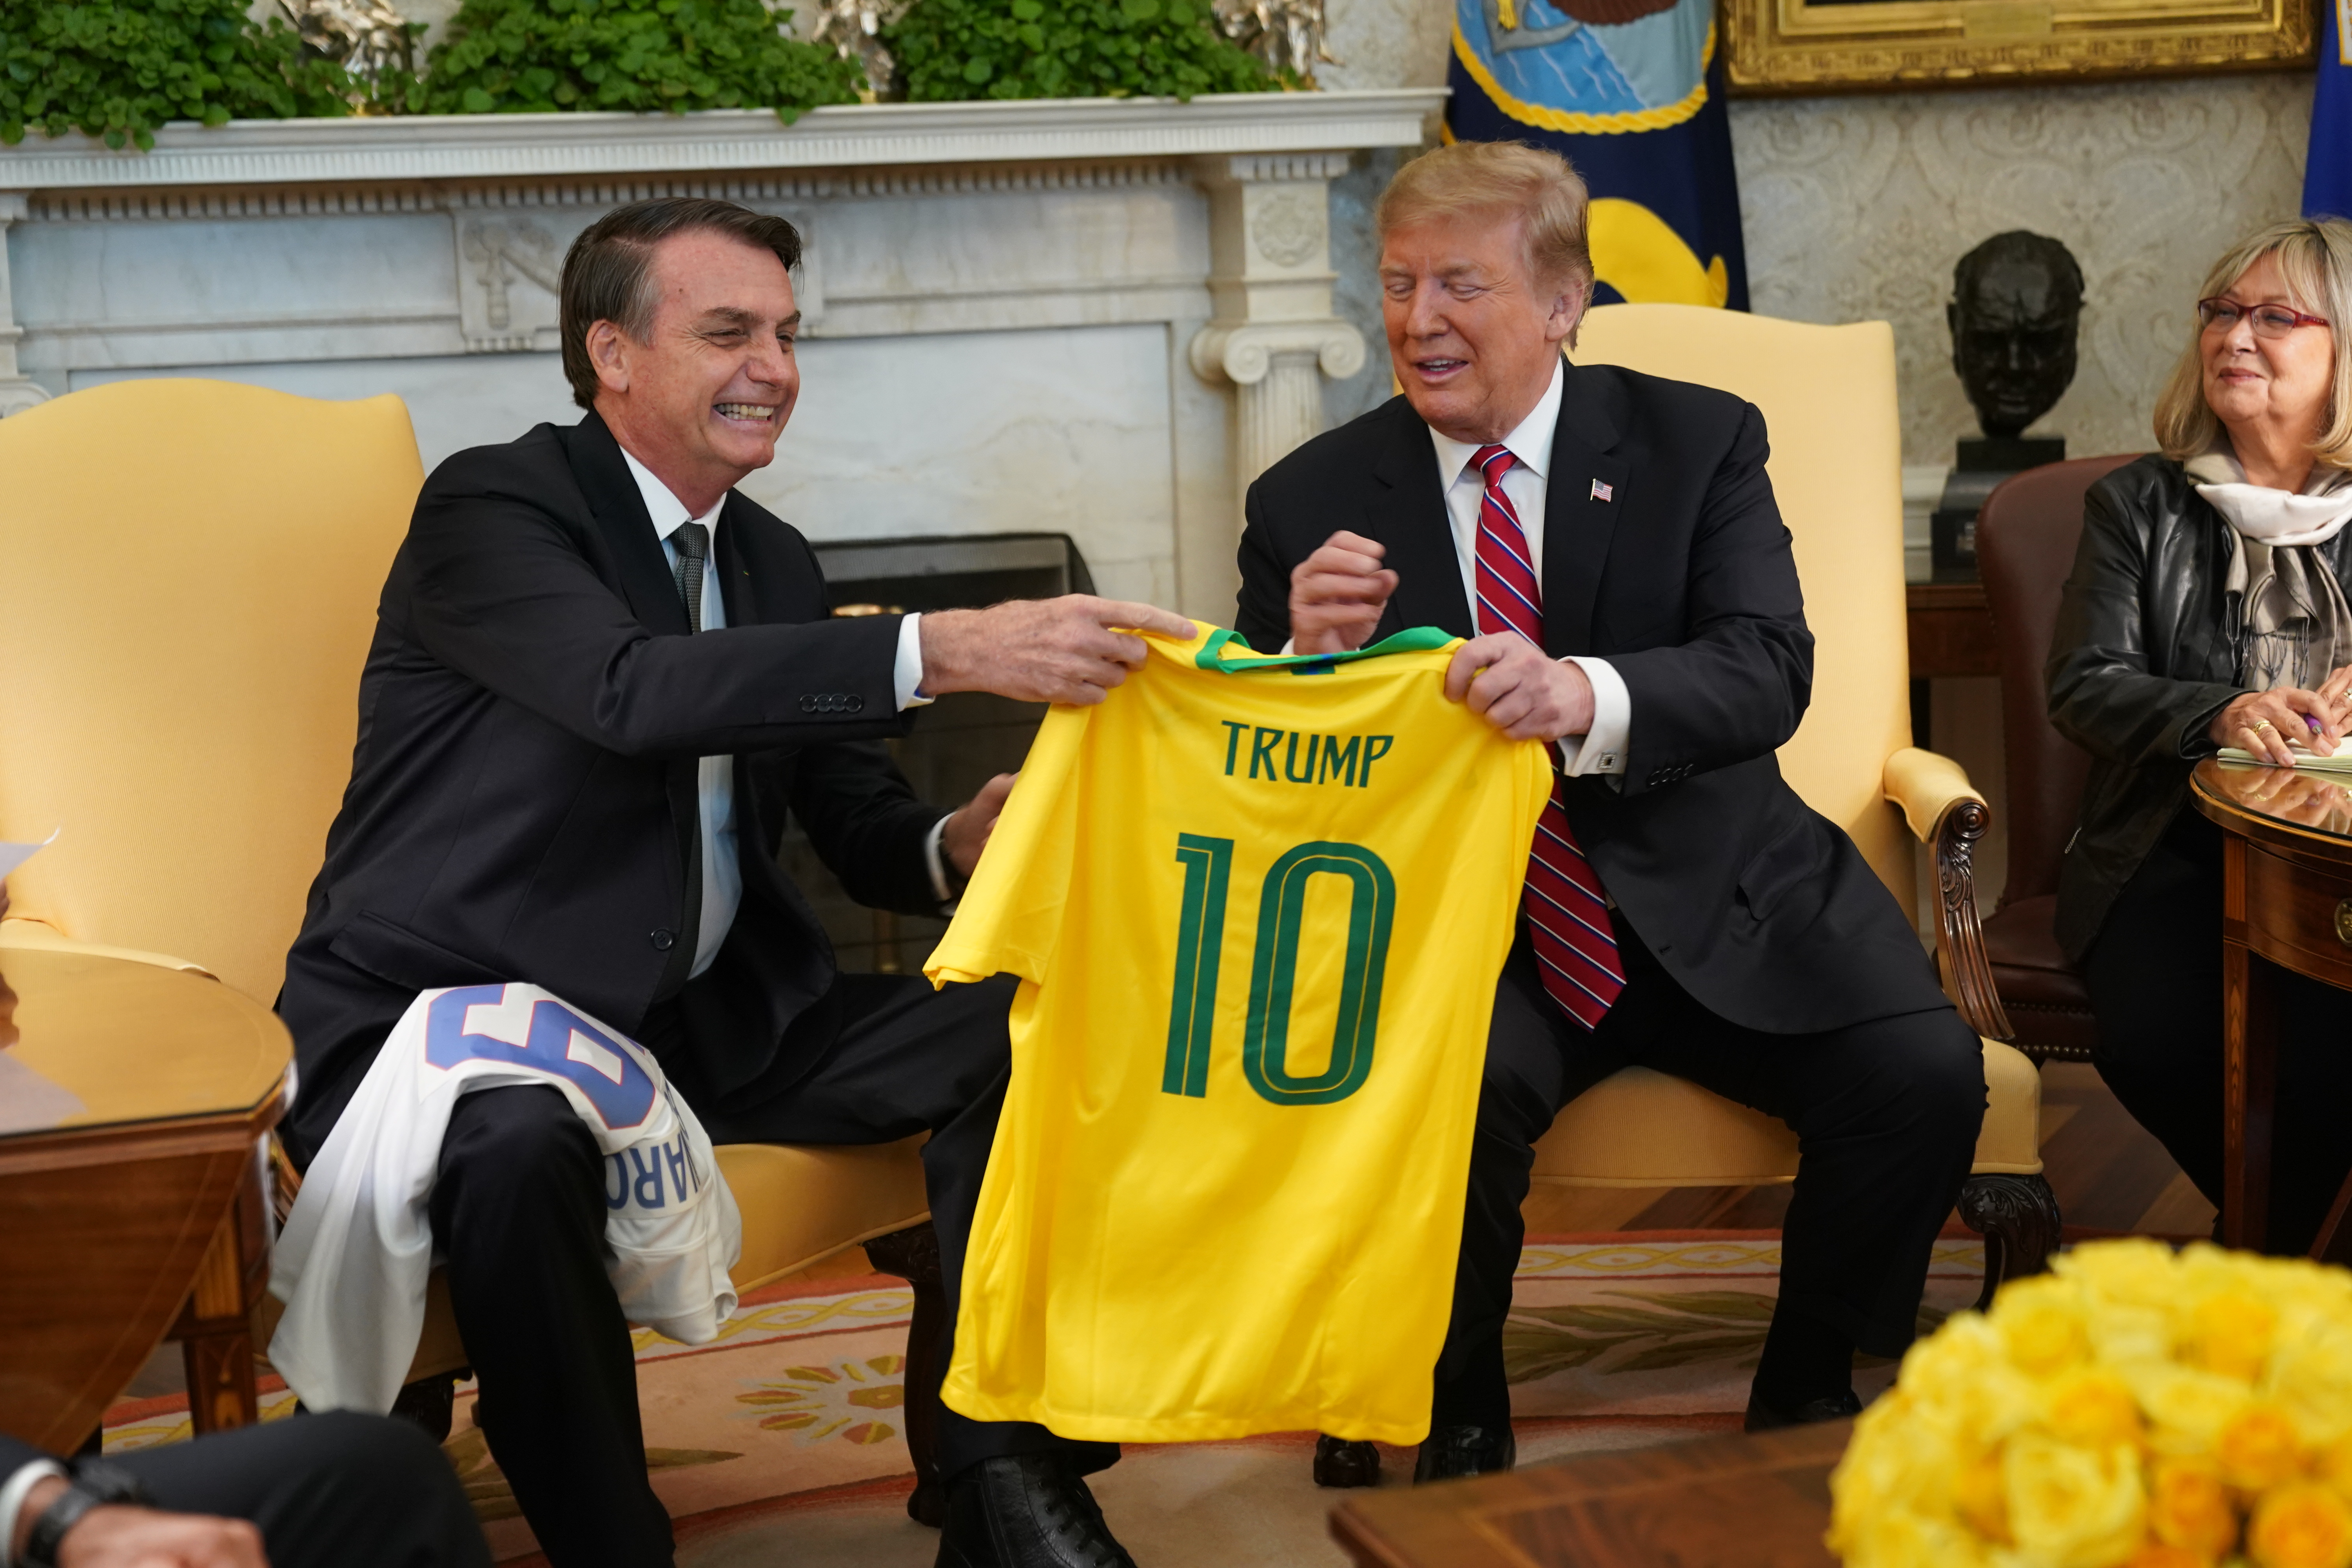 Brazilian President Jair Bolsonaro presents U.S. President Donald Trump with a Brazil national soccer team jersey Number 10 for striker position at the White House March 19, 2019 in Washington, DC. (Photo by Chris Kleponis-Pool/Getty Images)